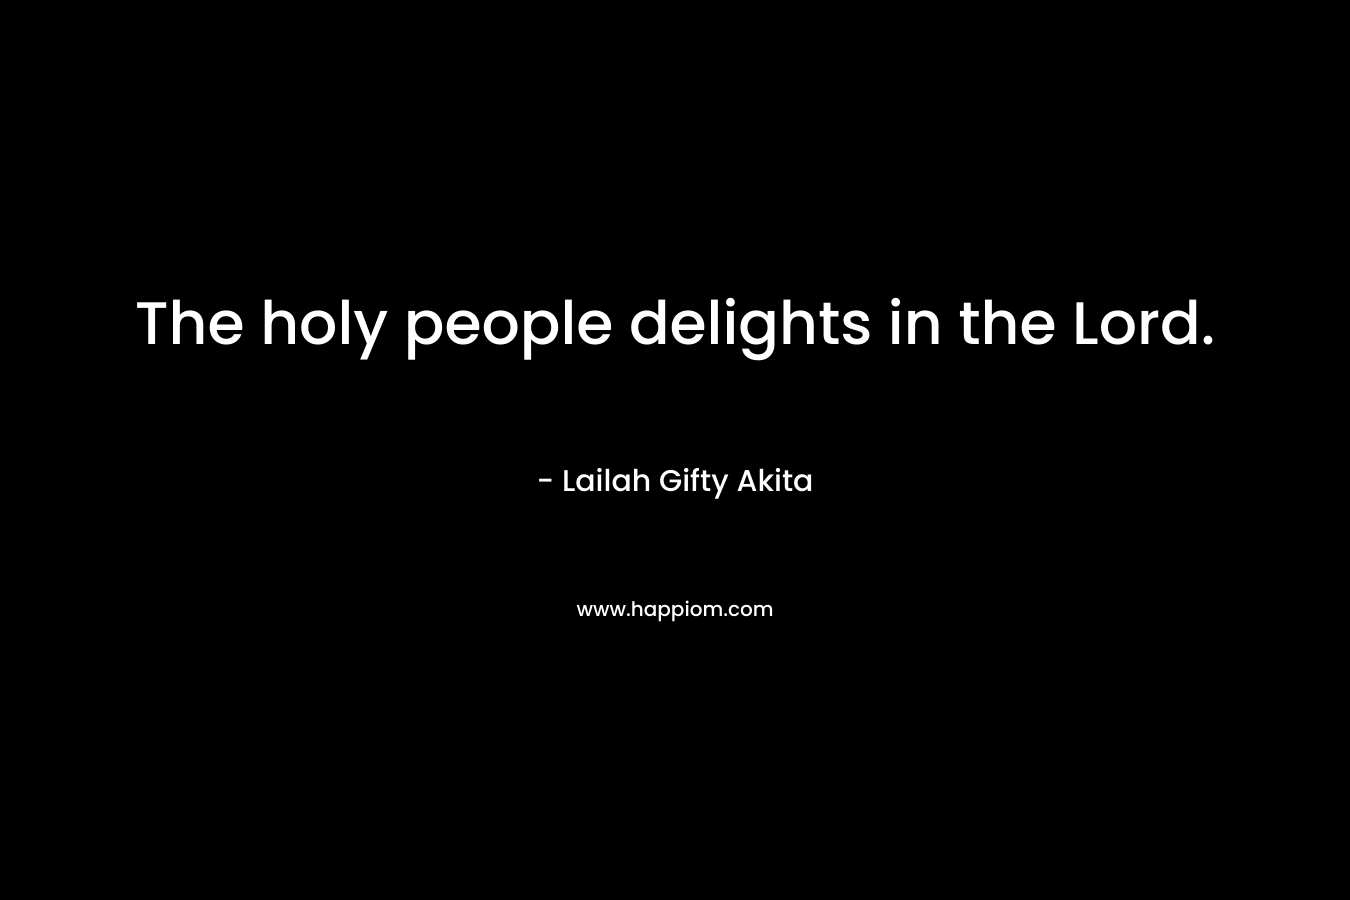 The holy people delights in the Lord. – Lailah Gifty Akita